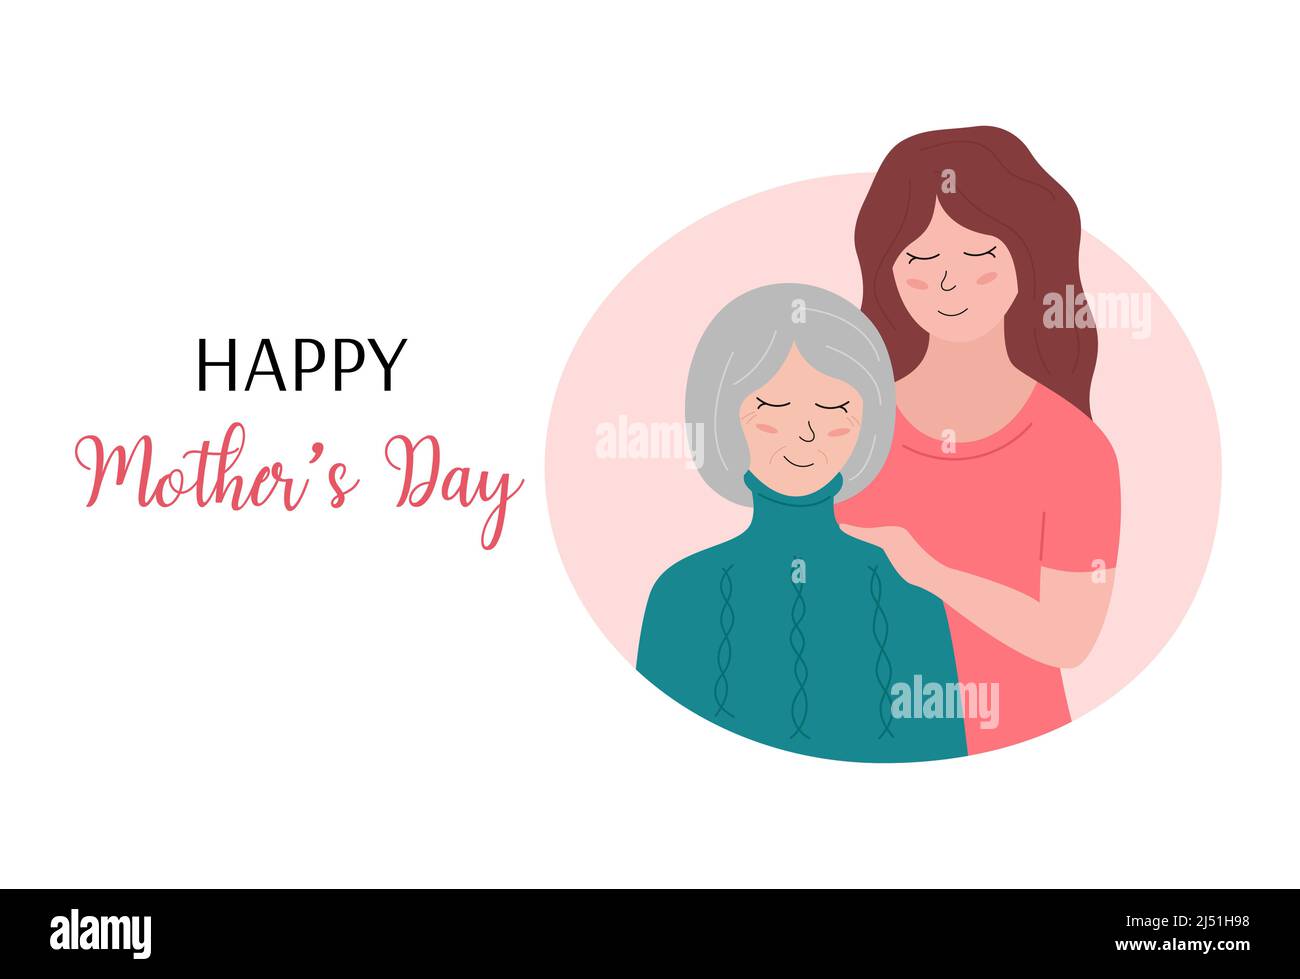 Happy Mothers Day greeting card. Elderly woman and adult daughter together. Smiling female family. Vector flat illustration. Mothers day holiday poste Stock Vector